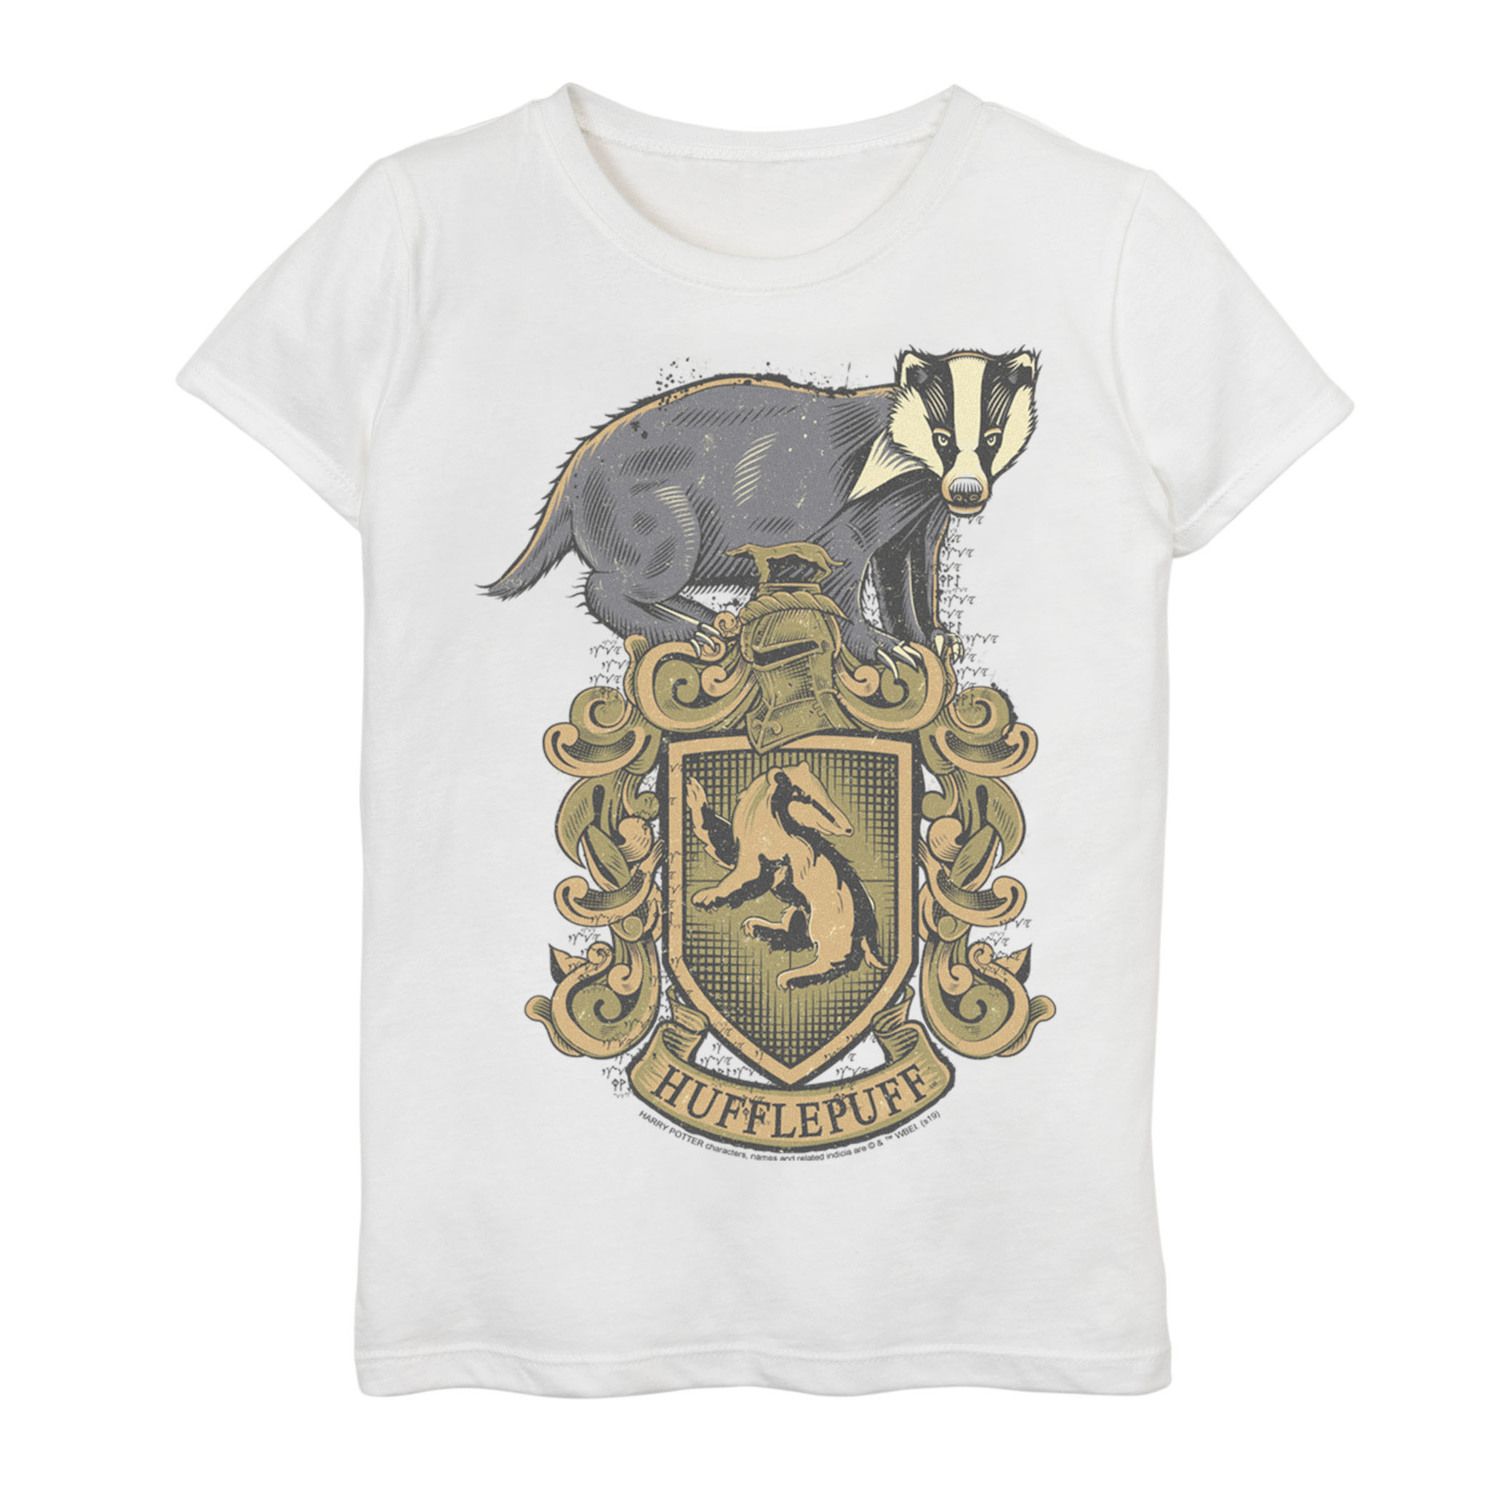 Image for Harry Potter Girls 7-16 Hufflepuff House Graphic Tee at Kohl's.